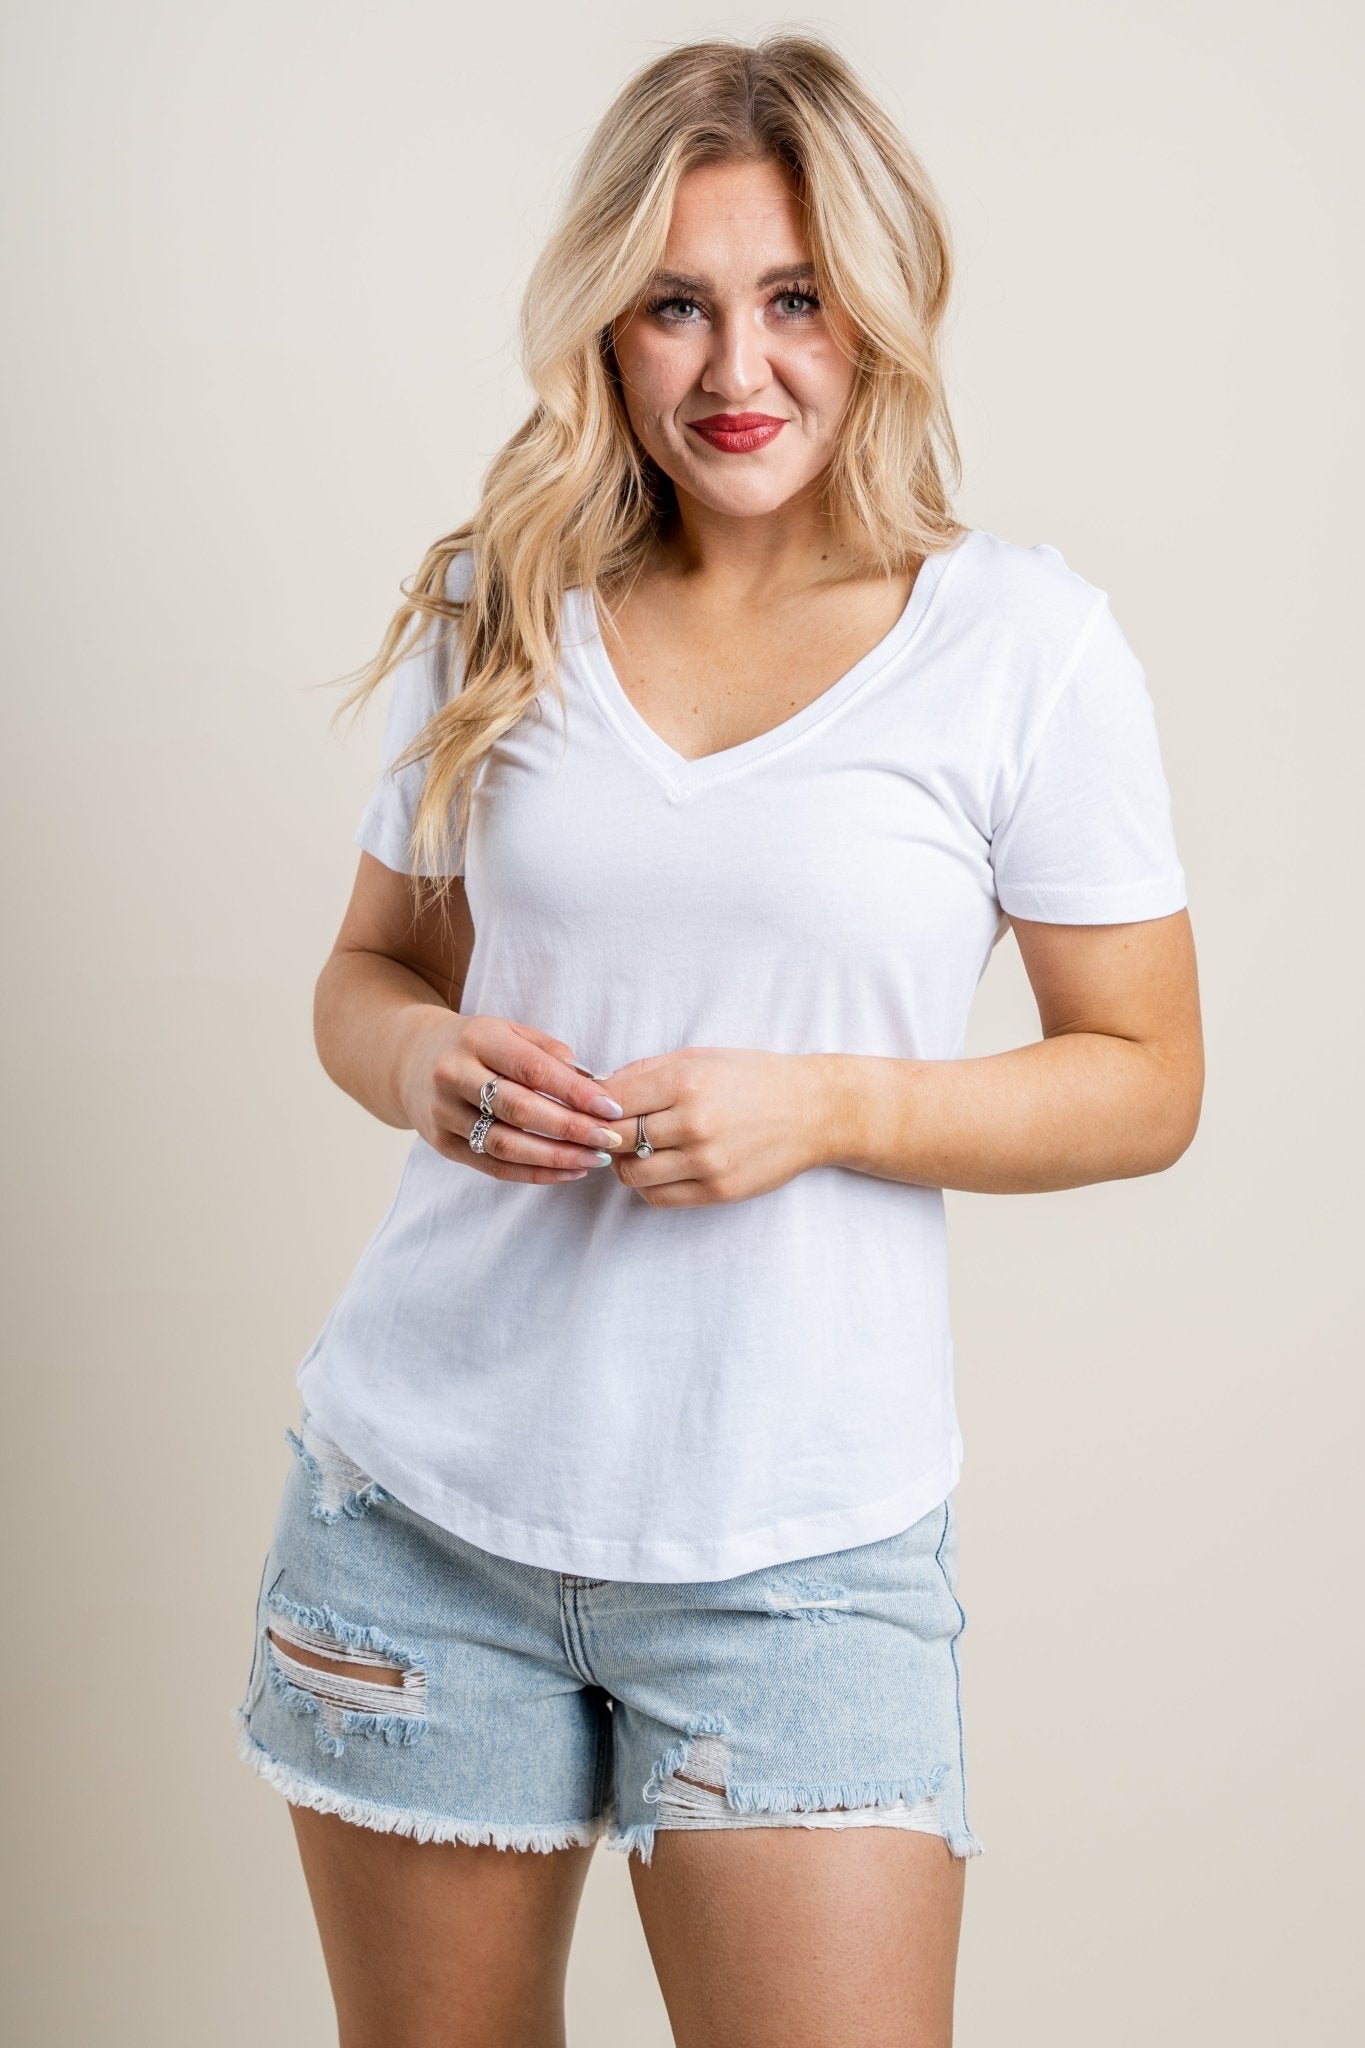 Z Supply Kasey modal v-neck top white - Z Supply Top - Z Supply Tops, Dresses, Tanks, Tees, Cardigans, Joggers and Loungewear at Lush Fashion Lounge